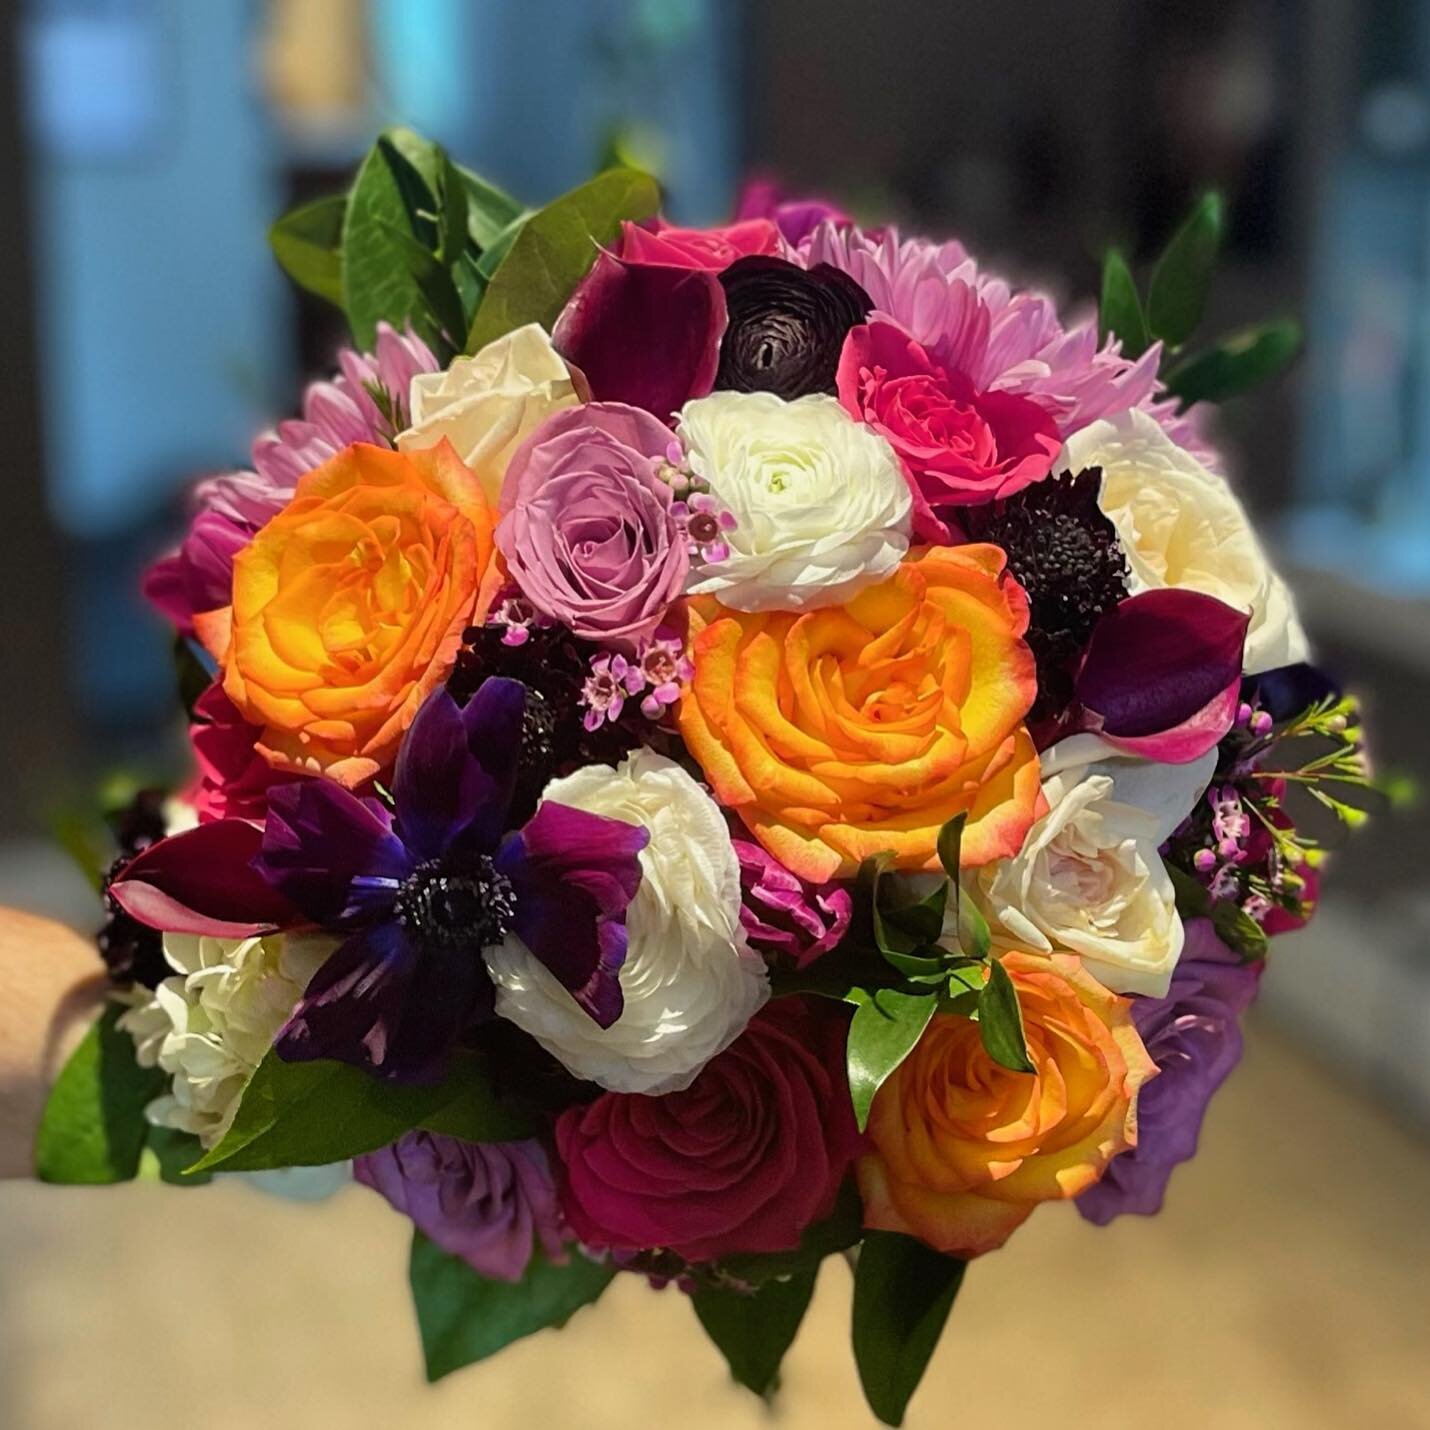 With spring comes all the beautiful colors&hellip;and weddings&hellip;and prom&hellip;and Mother&rsquo;s Day&hellip;Don&rsquo;t get caught flowerless, contact Fiddleleaf Florals for some beautiful designs today!

#freshcutflowers #bouquet #spring #we